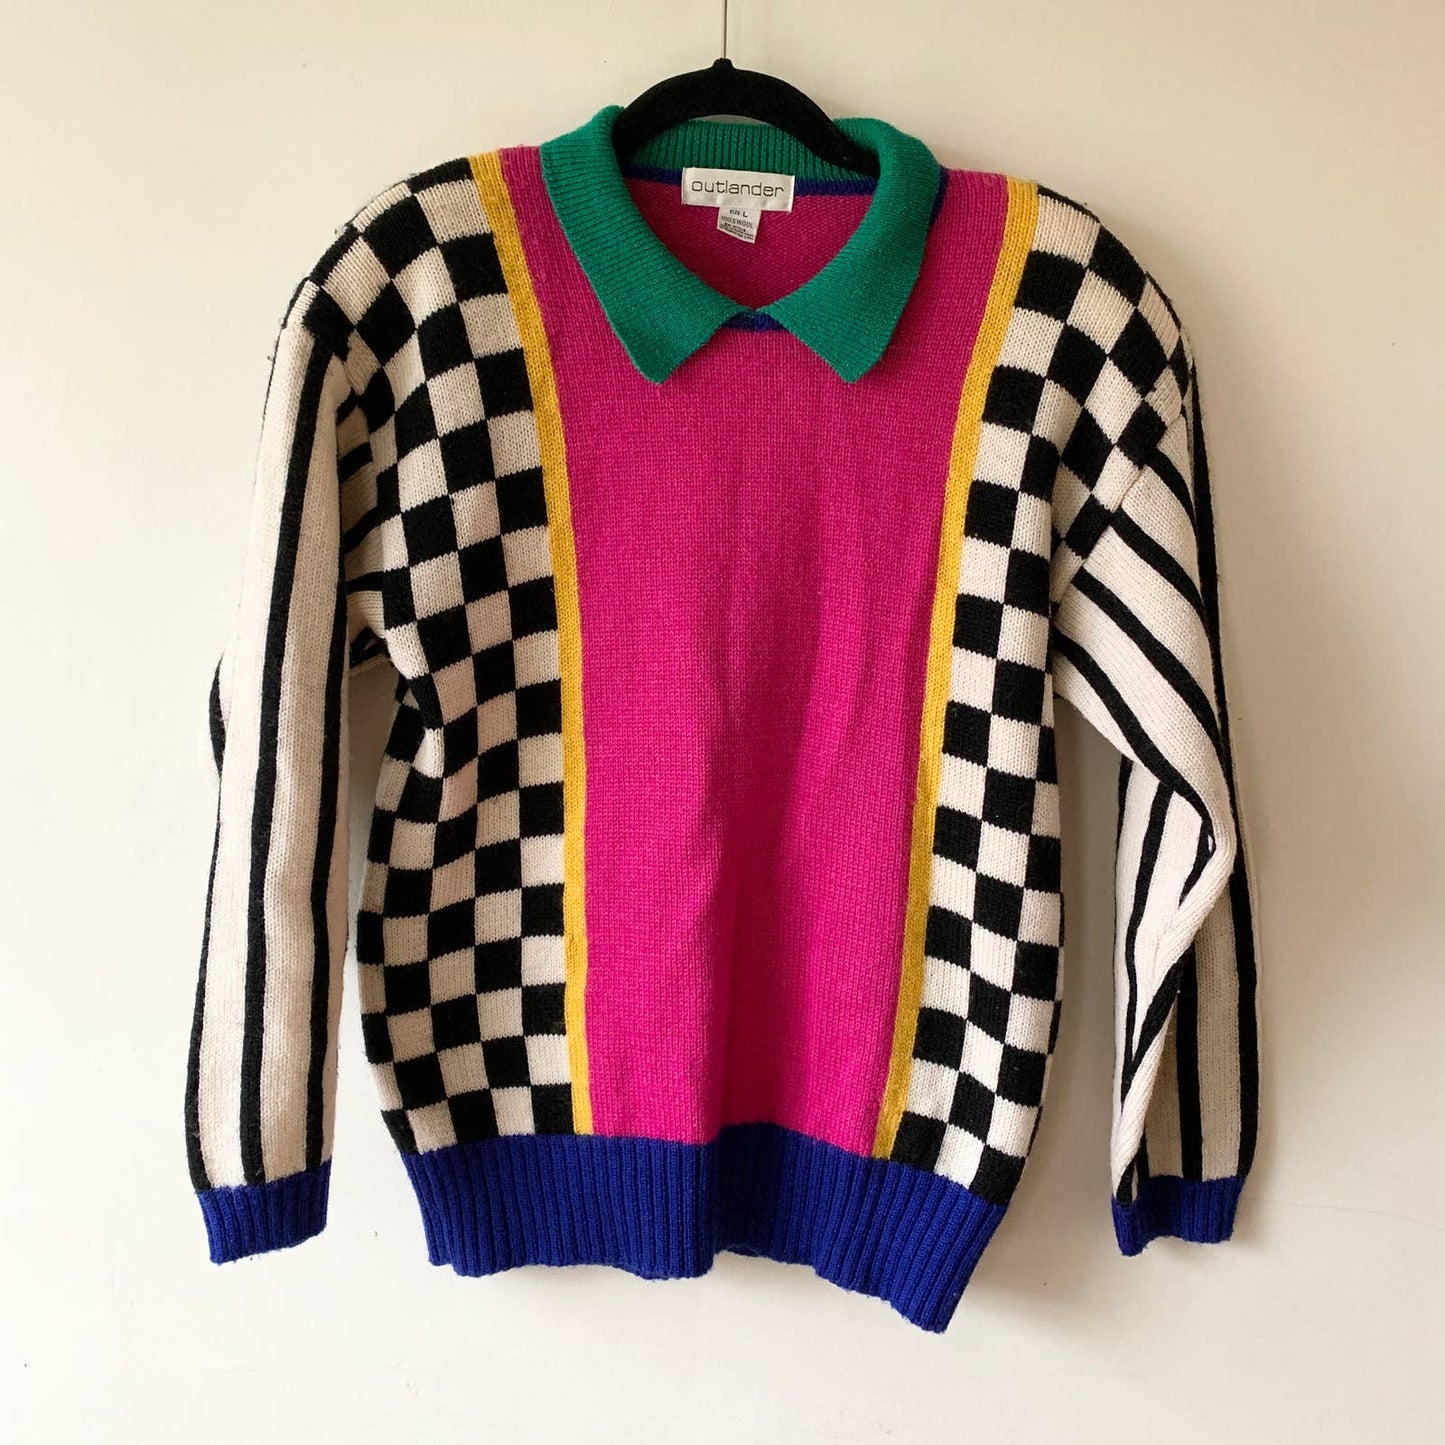 Vintage 1980s Outlander Checkered Striped Collared Pink Blue Black Sweater large